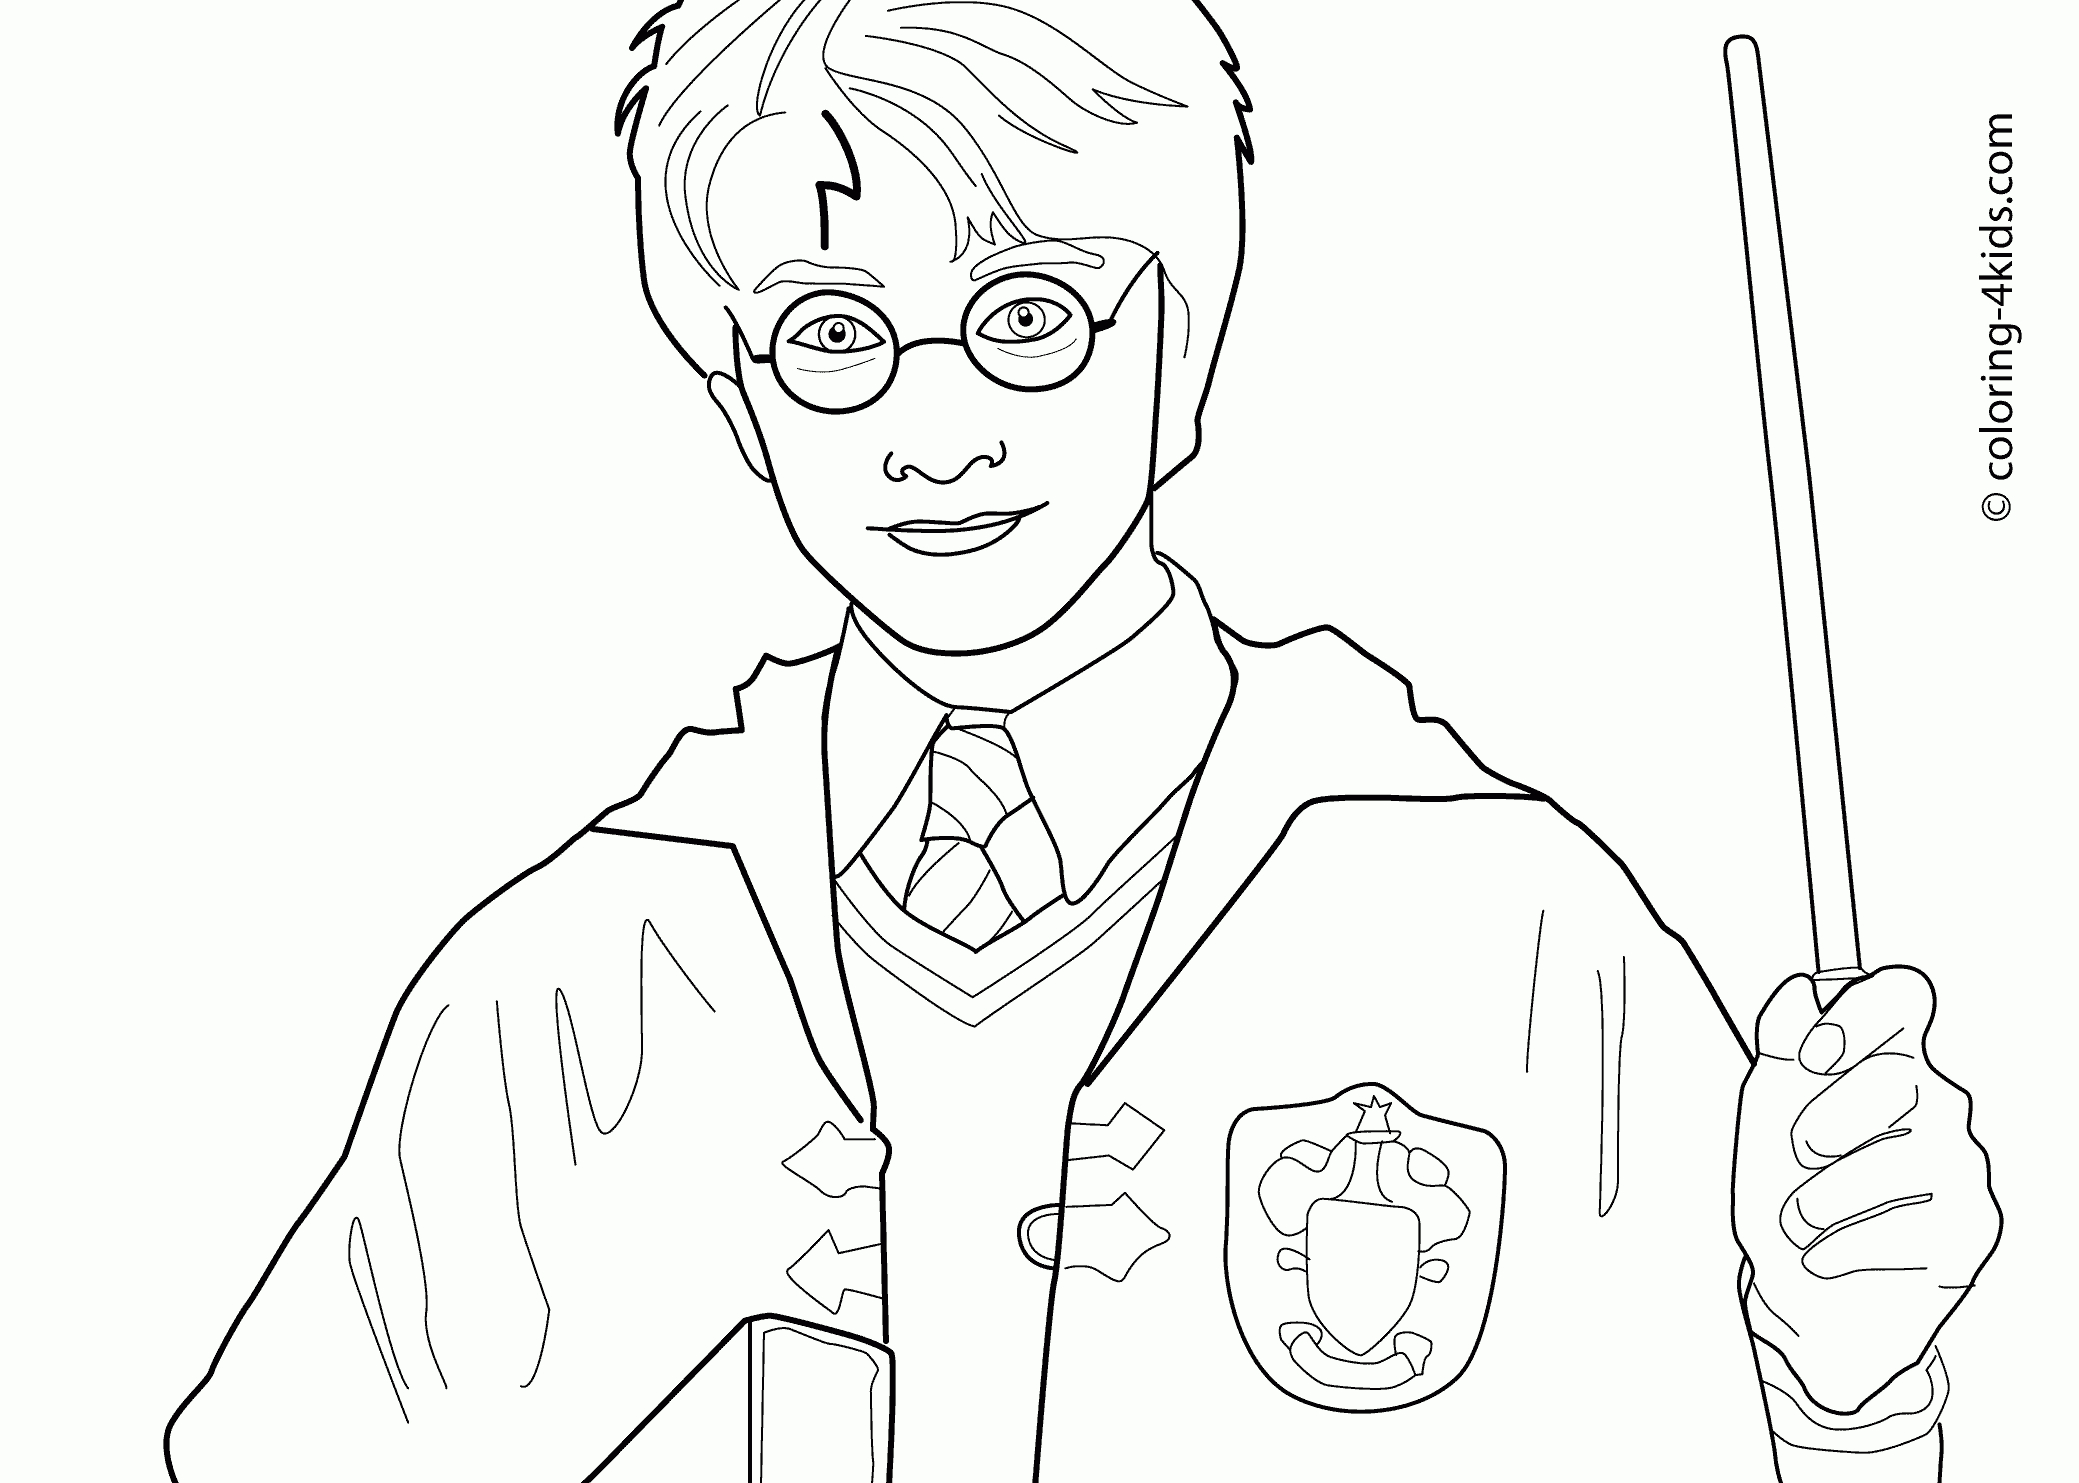 Harry Potter Coloring Pages For Kids, Printable Free Coloring Books - Free Printable Harry Potter Colouring Sheets